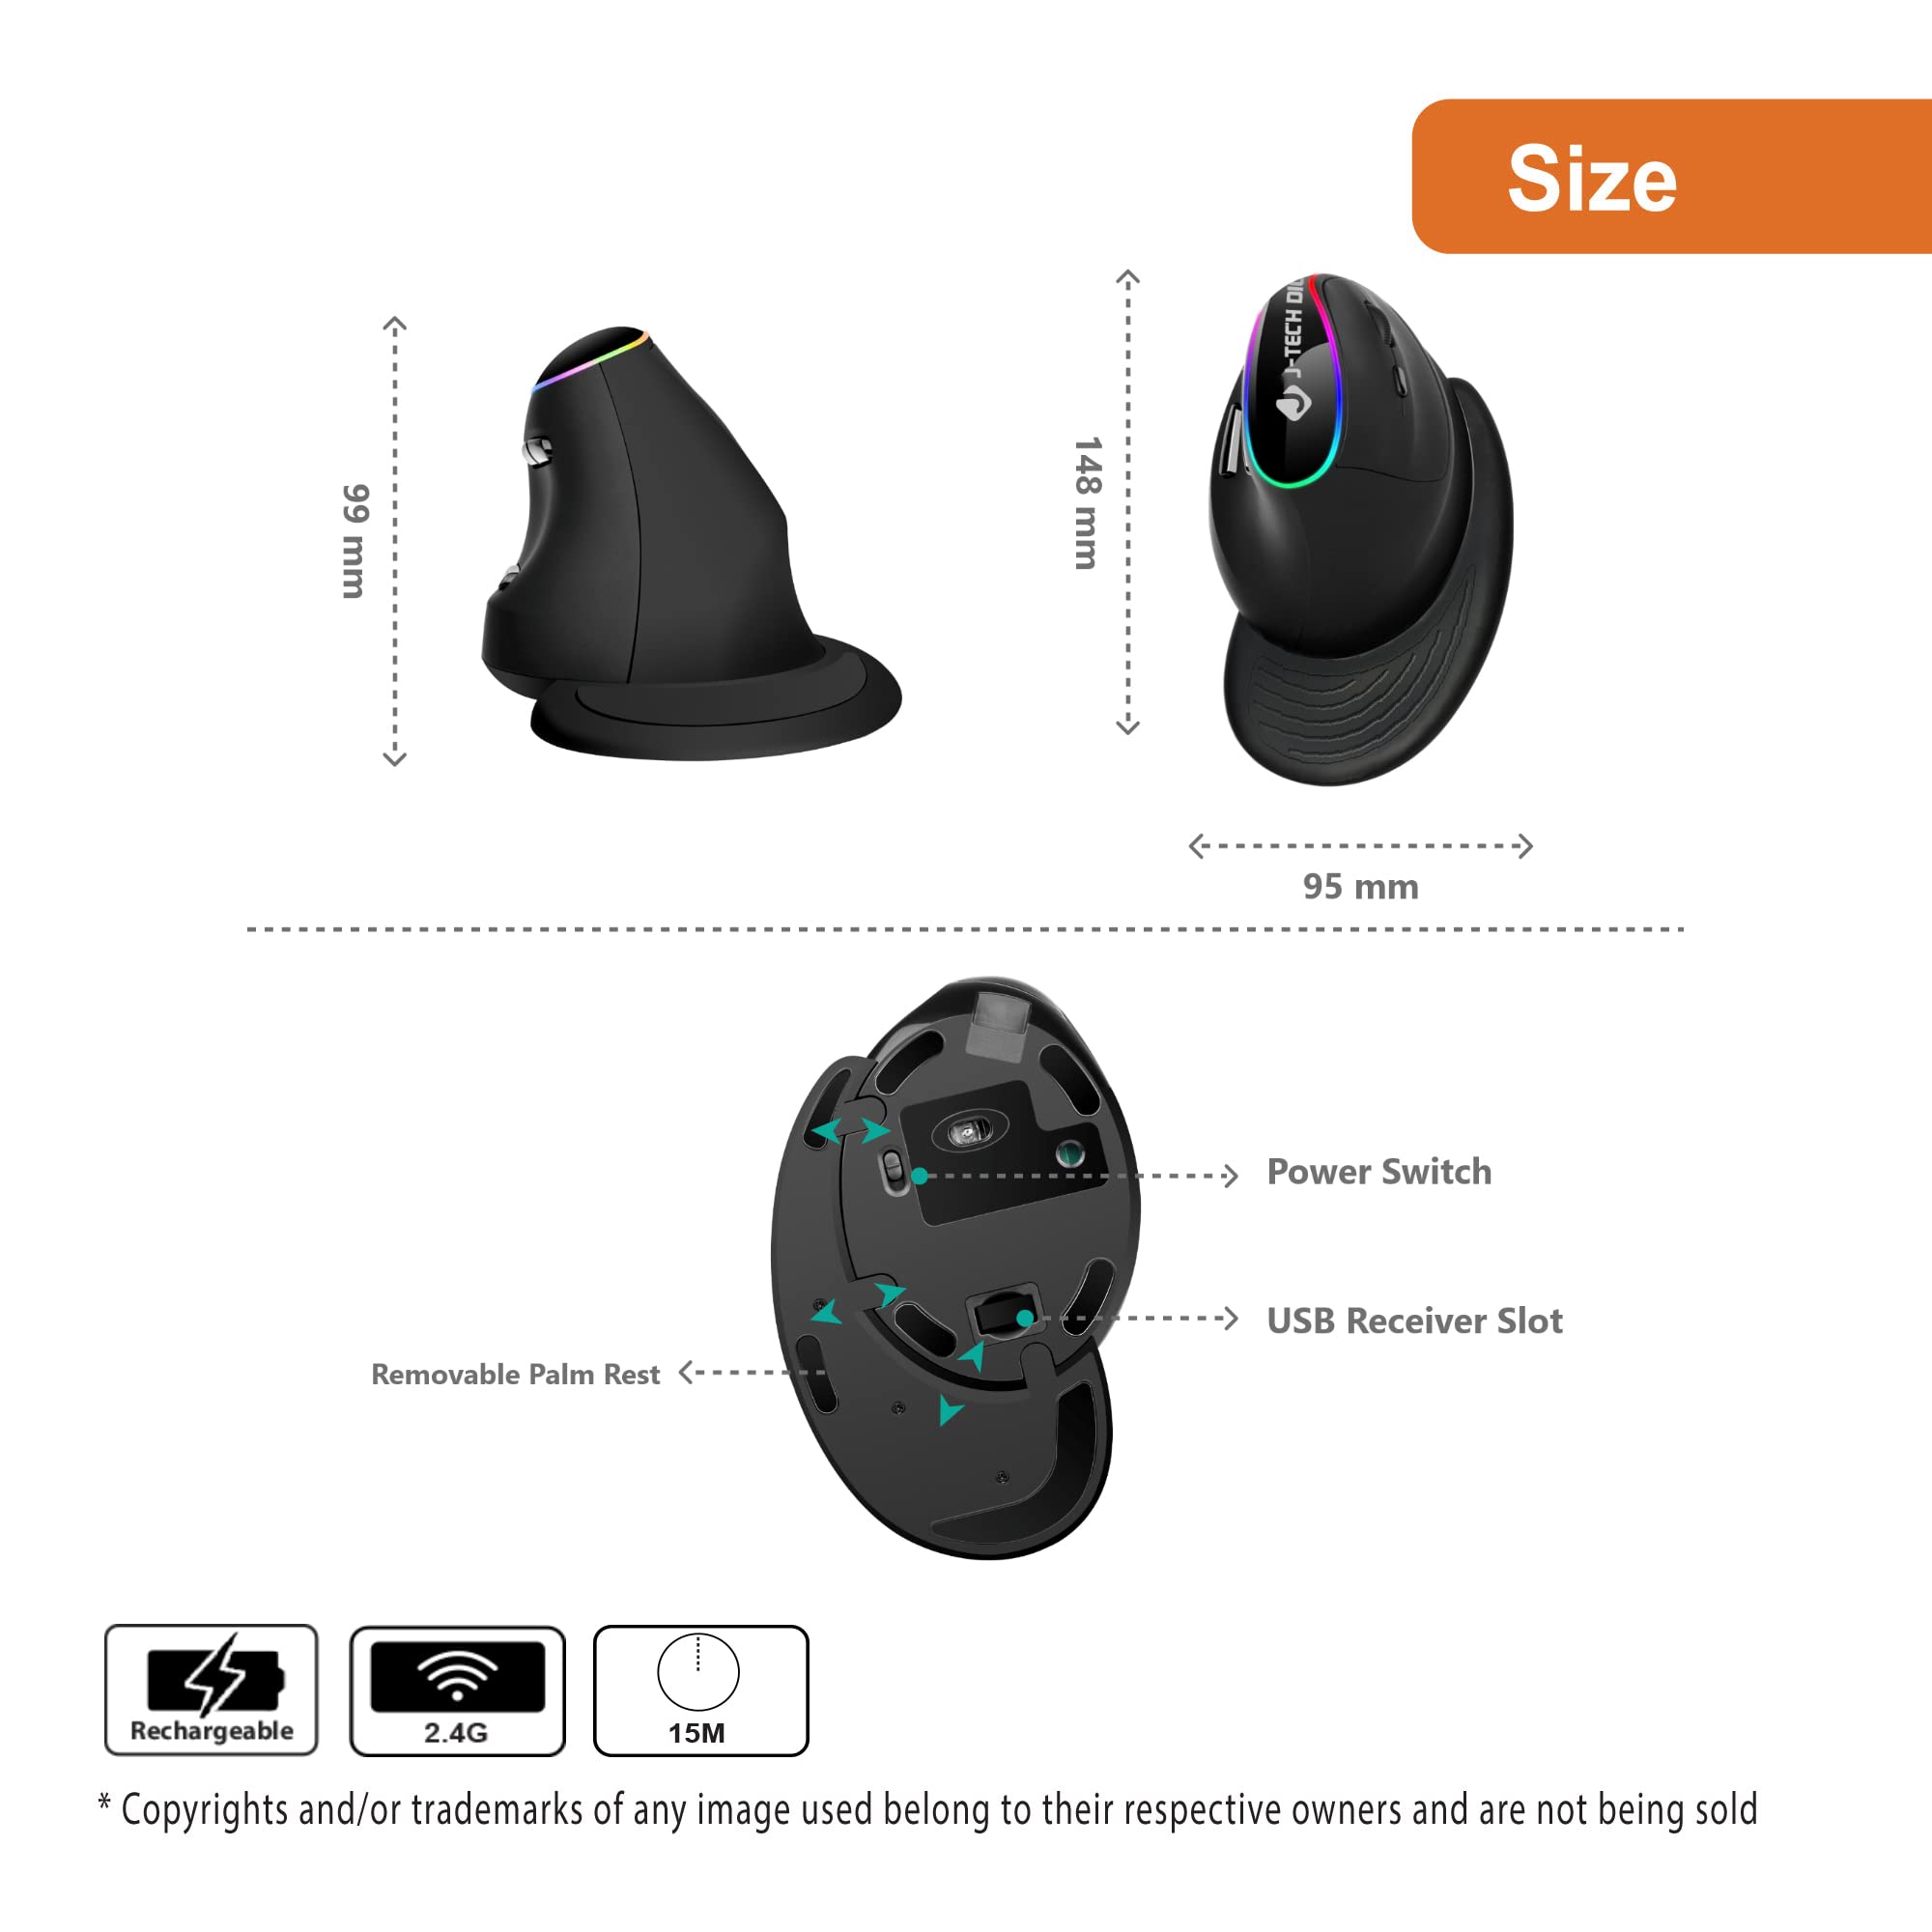 J-Tech Digital Ergonomic Mouse with Wireless Connection, Removable Palm Rest, Thumb Buttons, Rechargeable Battery, 800 DPI, Compatible with Windows and MAC OS